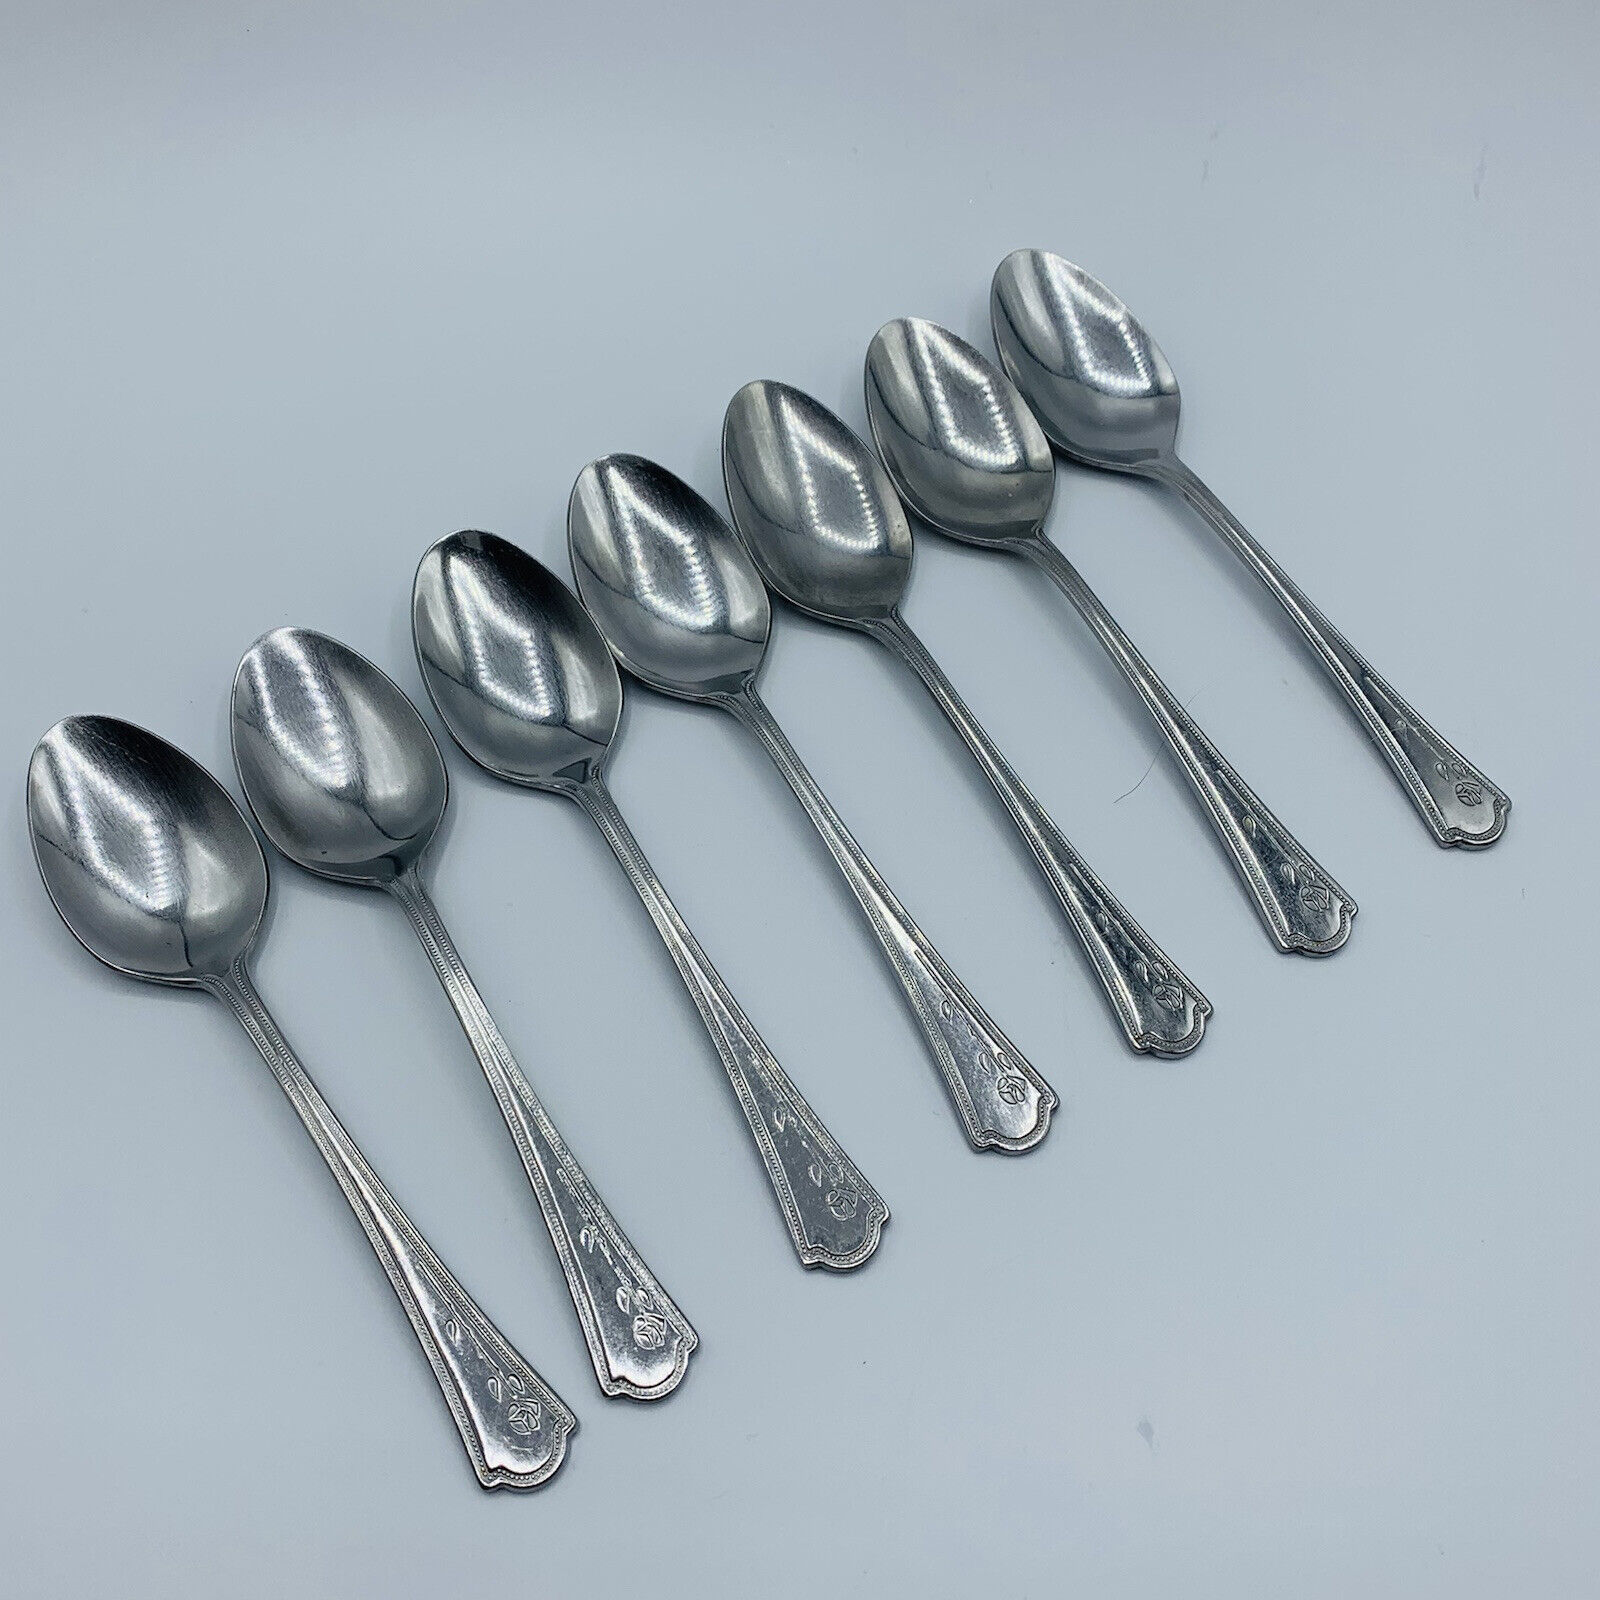 Set of 7 Stainless Teaspoons UNF 168 Glossy Floral Made in Korea Flatware